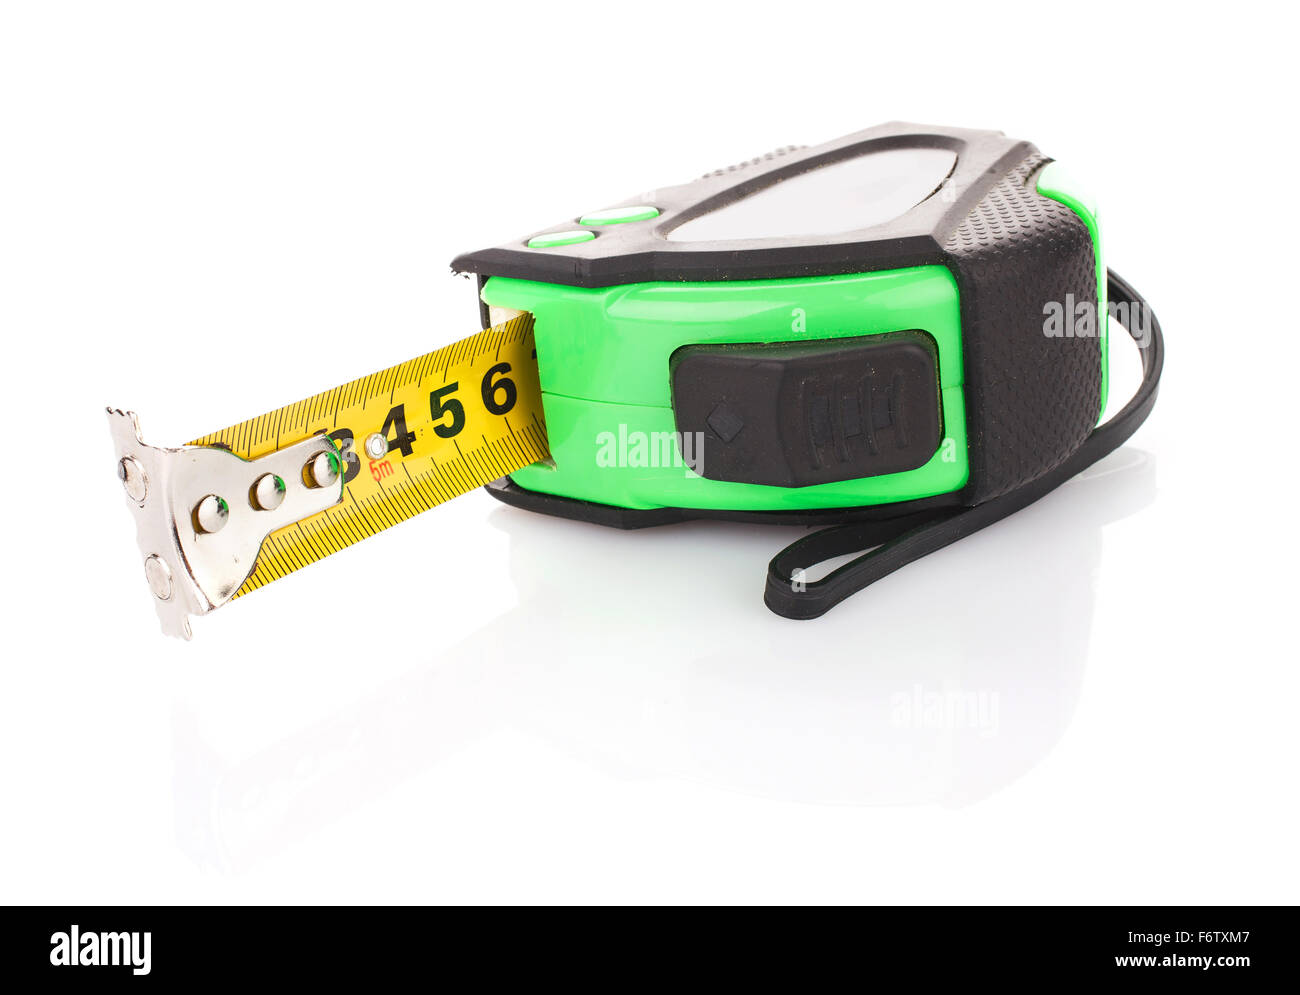 measuring tape for tool roulette Stock Photo